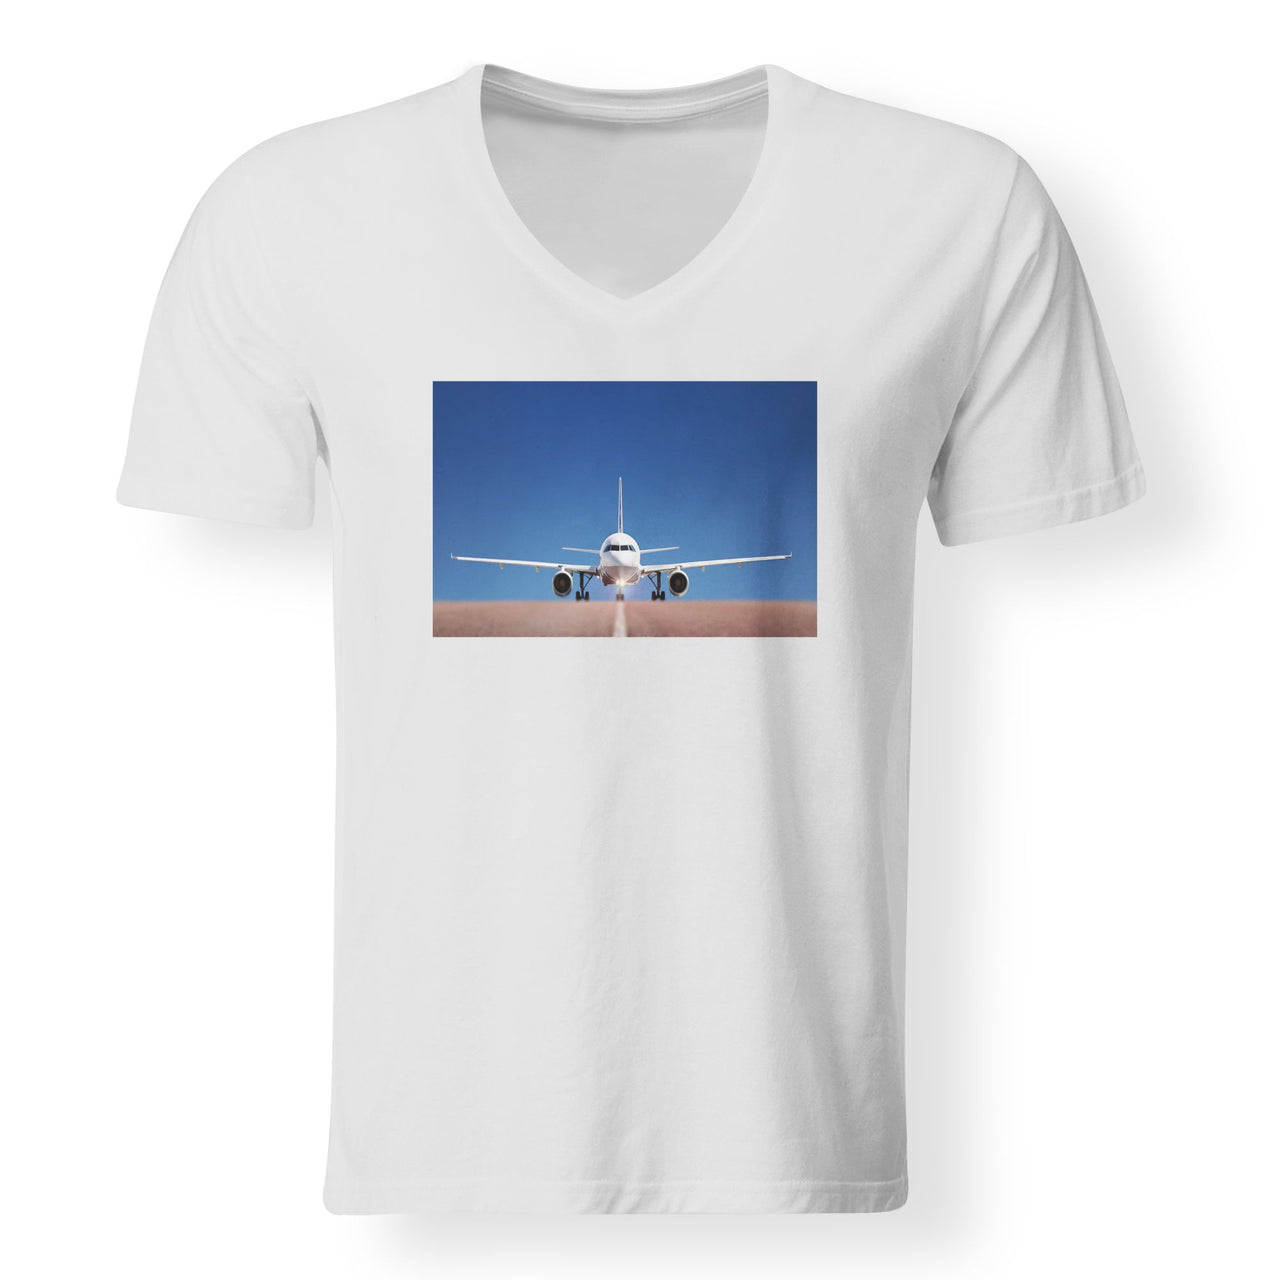 Face to Face with Airbus A320 Designed V-Neck T-Shirts